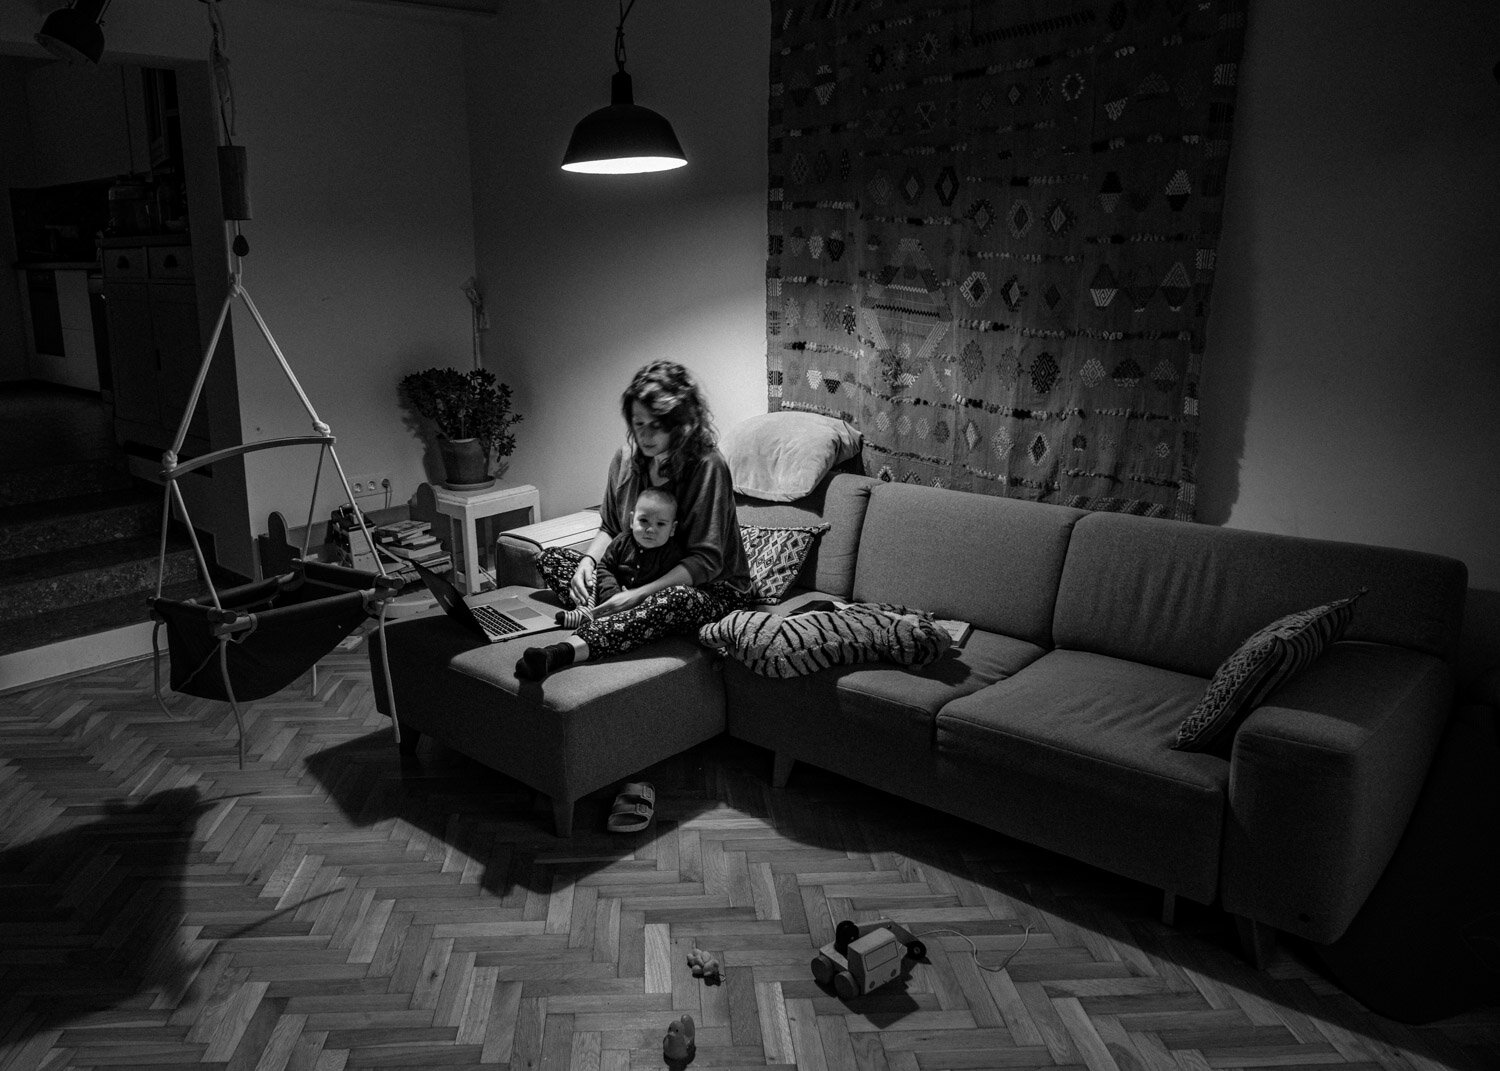   Helga  and her six months old baby  Zsiga  in their living room. Zsiga was born during the first lockdown in Hungary right after Helga and her sister started a new family business. Now, a few months later, she is back to work and managing the new b